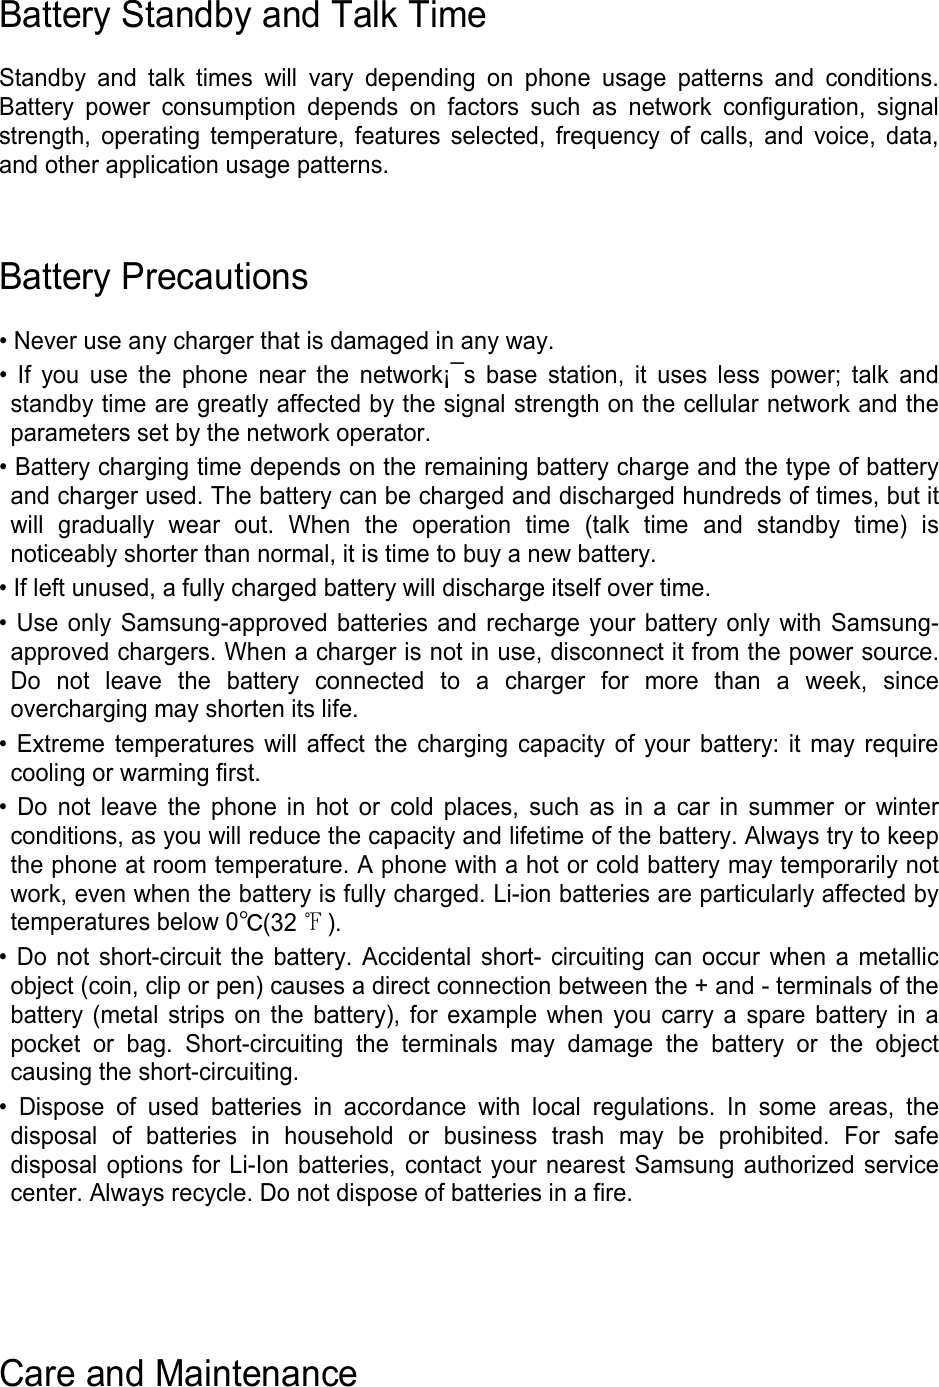 Battery Standby and Talk Time  Standby and talk times will vary depending on phone usage patterns and conditions. Battery power consumption depends on factors such as network configuration, signal strength, operating temperature, features selected, frequency of calls, and voice, data, and other application usage patterns.     Battery Precautions  • Never use any charger that is damaged in any way. • If you use the phone near the network¡¯s base station, it uses less power; talk and standby time are greatly affected by the signal strength on the cellular network and the parameters set by the network operator. • Battery charging time depends on the remaining battery charge and the type of battery and charger used. The battery can be charged and discharged hundreds of times, but it will gradually wear out. When the operation time (talk time and standby time) is noticeably shorter than normal, it is time to buy a new battery. • If left unused, a fully charged battery will discharge itself over time. • Use only Samsung-approved batteries and recharge your battery only with Samsung-approved chargers. When a charger is not in use, disconnect it from the power source. Do not leave the battery connected to a charger for more than a week, since overcharging may shorten its life. • Extreme temperatures will affect the charging capacity of your battery: it may require cooling or warming first. • Do not leave the phone in hot or cold places, such as in a car in summer or winter conditions, as you will reduce the capacity and lifetime of the battery. Always try to keep the phone at room temperature. A phone with a hot or cold battery may temporarily not work, even when the battery is fully charged. Li-ion batteries are particularly affected by temperatures below 0℃(32 ℉). • Do not short-circuit the battery. Accidental short- circuiting can occur when a metallic object (coin, clip or pen) causes a direct connection between the + and - terminals of the battery (metal strips on the battery), for example when you carry a spare battery in a pocket or bag. Short-circuiting the terminals may damage the battery or the object causing the short-circuiting. • Dispose of used batteries in accordance with local regulations. In some areas, the disposal of batteries in household or business trash may be prohibited. For safe disposal options for Li-Ion batteries, contact your nearest Samsung authorized service center. Always recycle. Do not dispose of batteries in a fire.     Care and Maintenance 